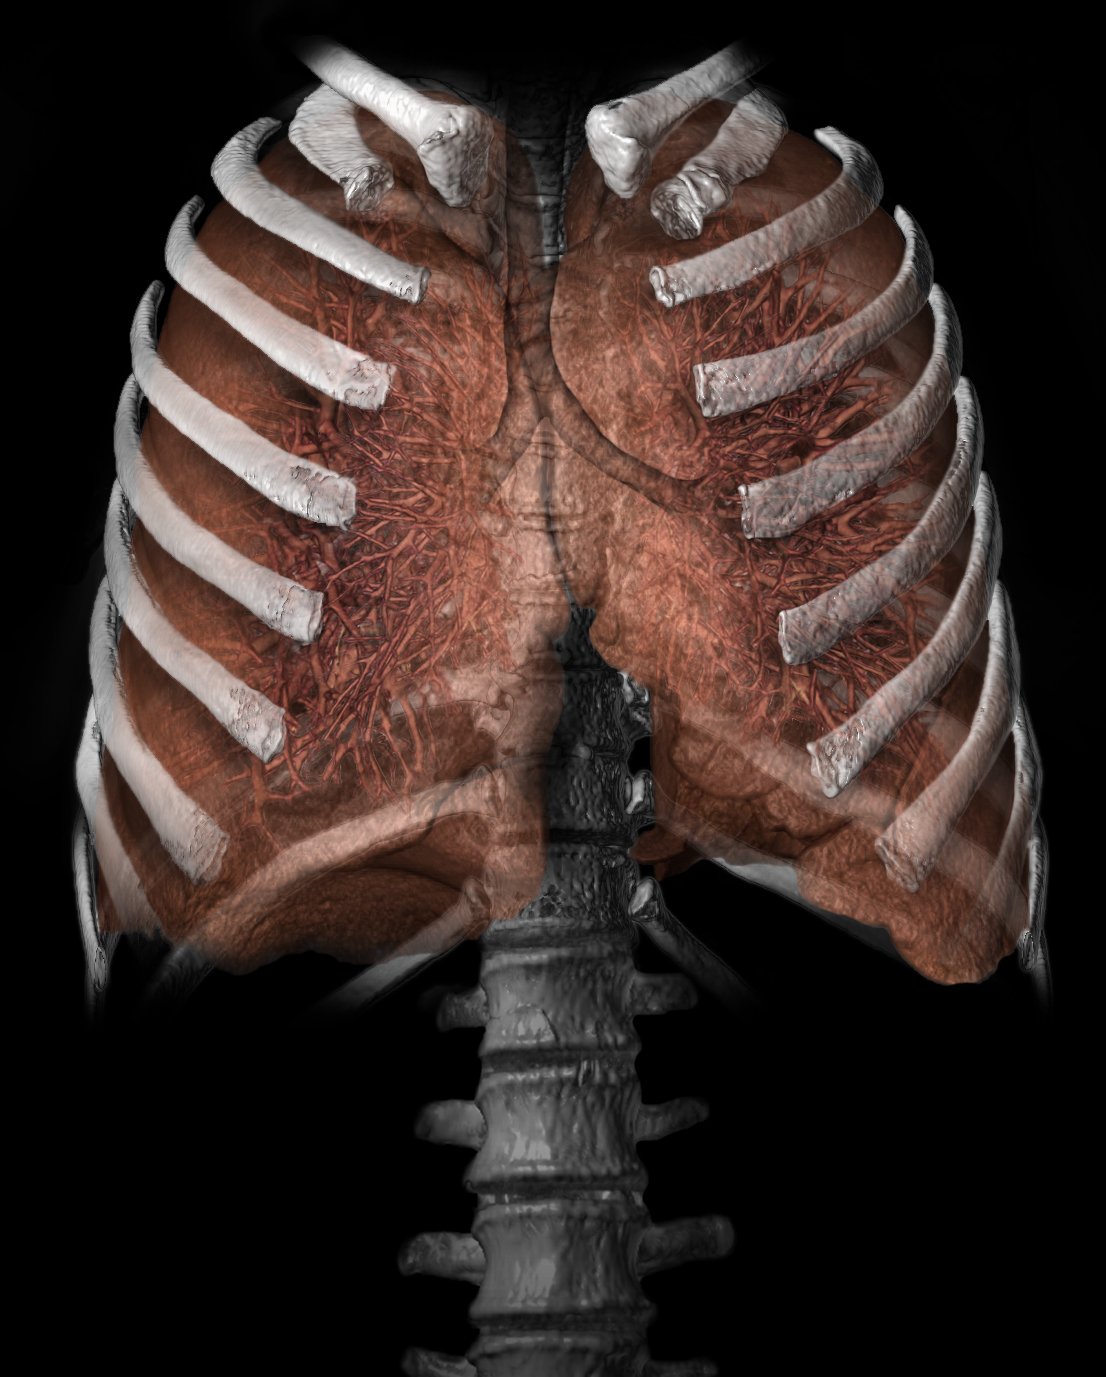  Lung 3D from CT scan